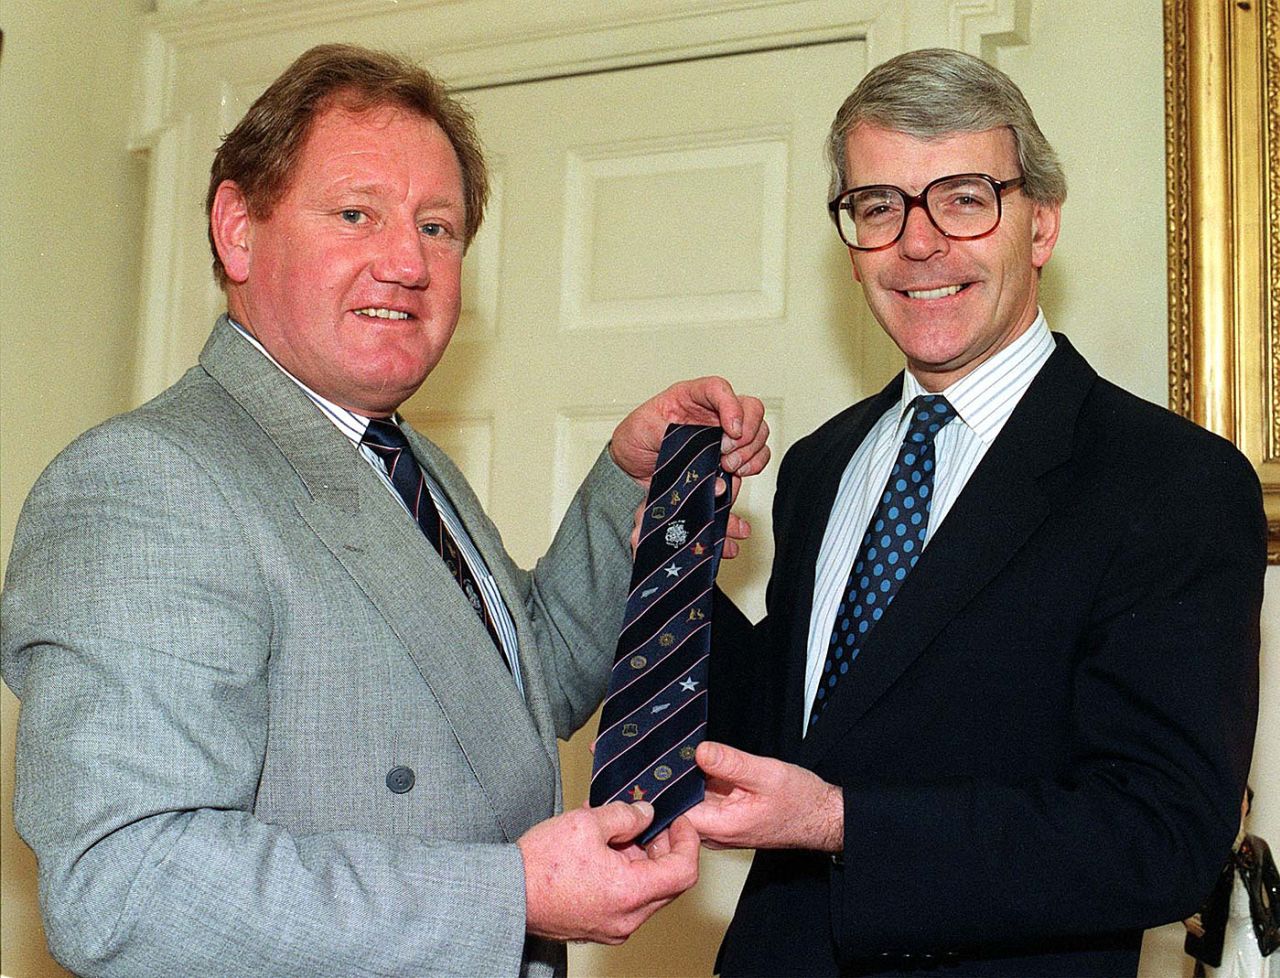 David Bairstow with the then British prime minister John Major in 1992, England, February 10, 1992